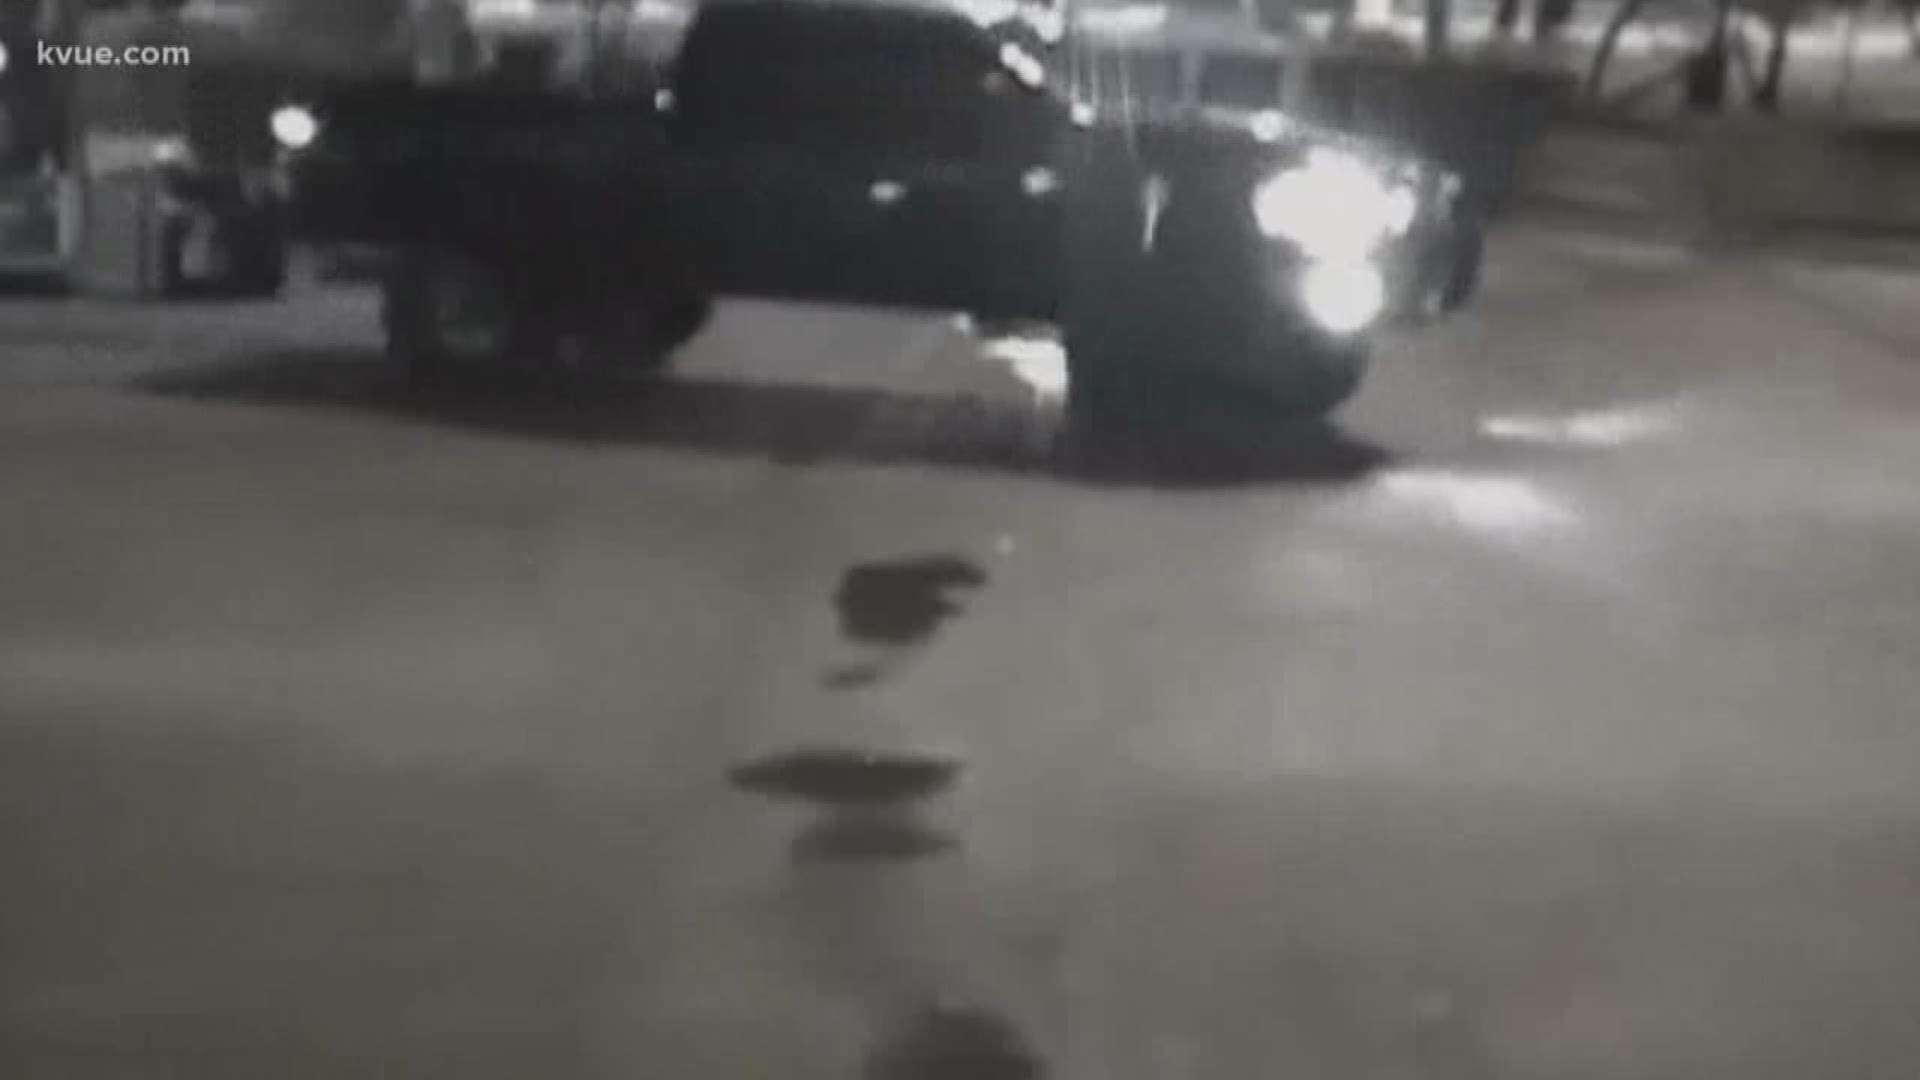 A sergeant with Austin ISD notified investigators that an officer on force drove a truck similar to the one in the video.